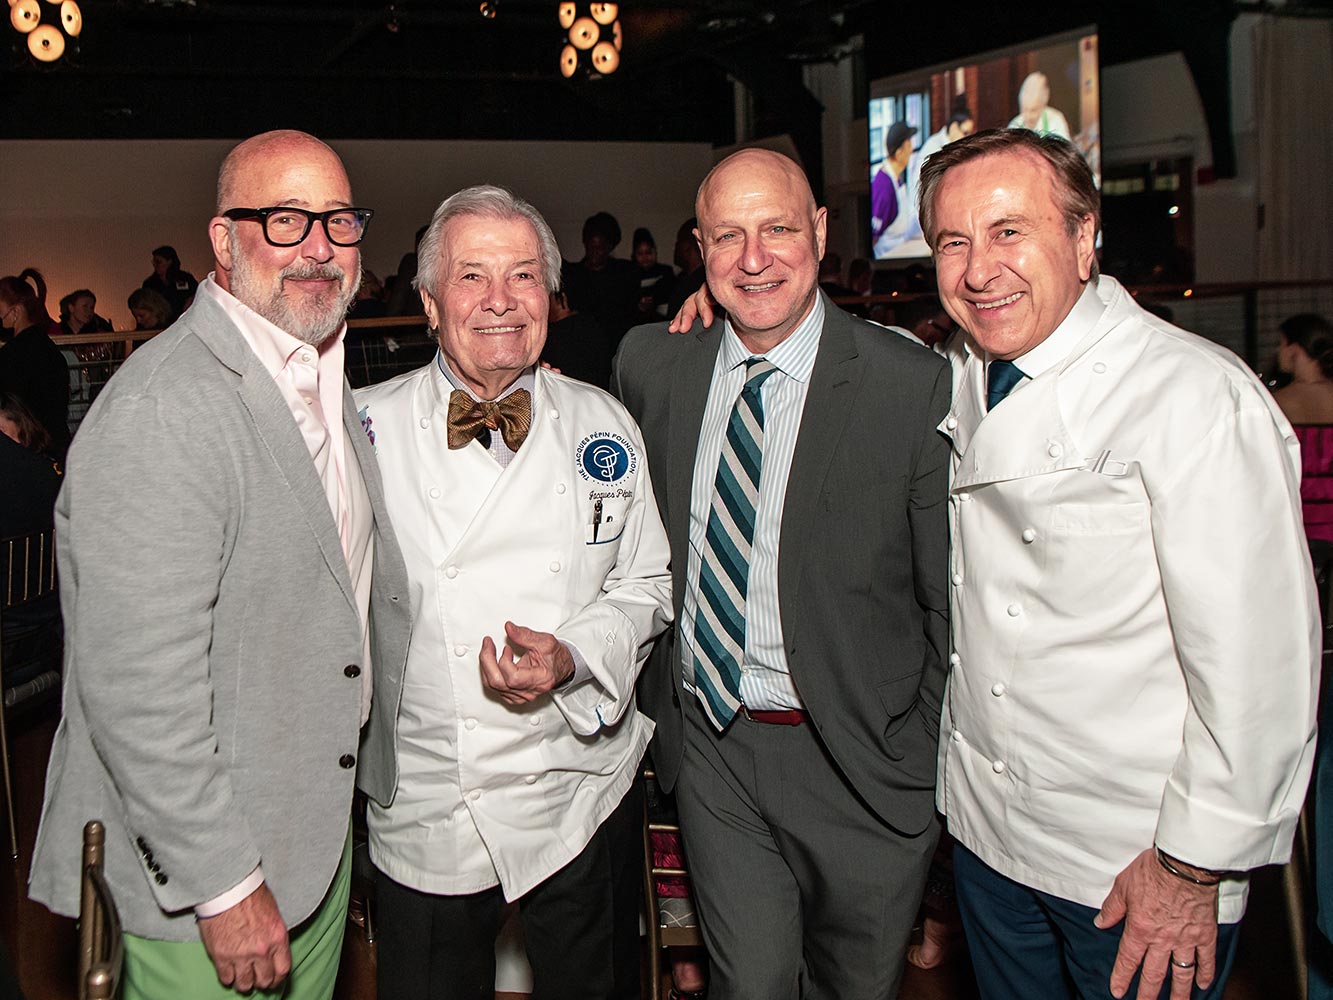 Andrew Zimmern, Jacques Pépin, Tom Colicchio, Daniel Boulud at the JPF 6th Anniversary Gala